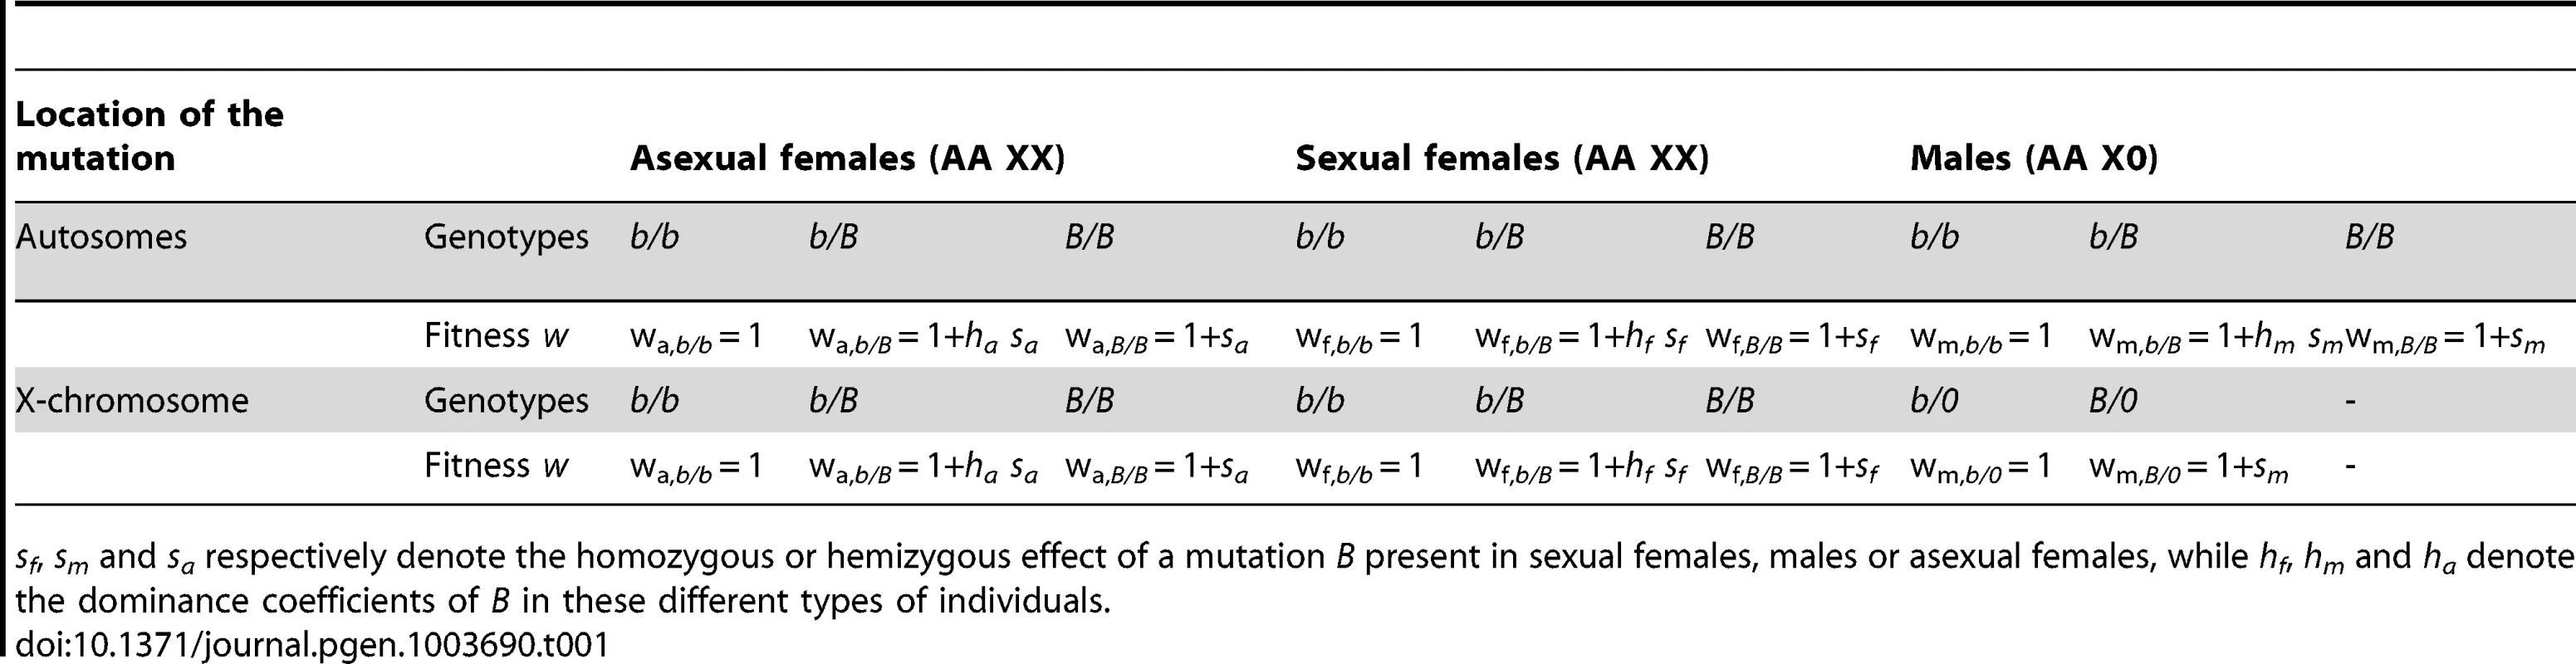 Model of the effects on fitness (<i>w</i>) of a mutation.